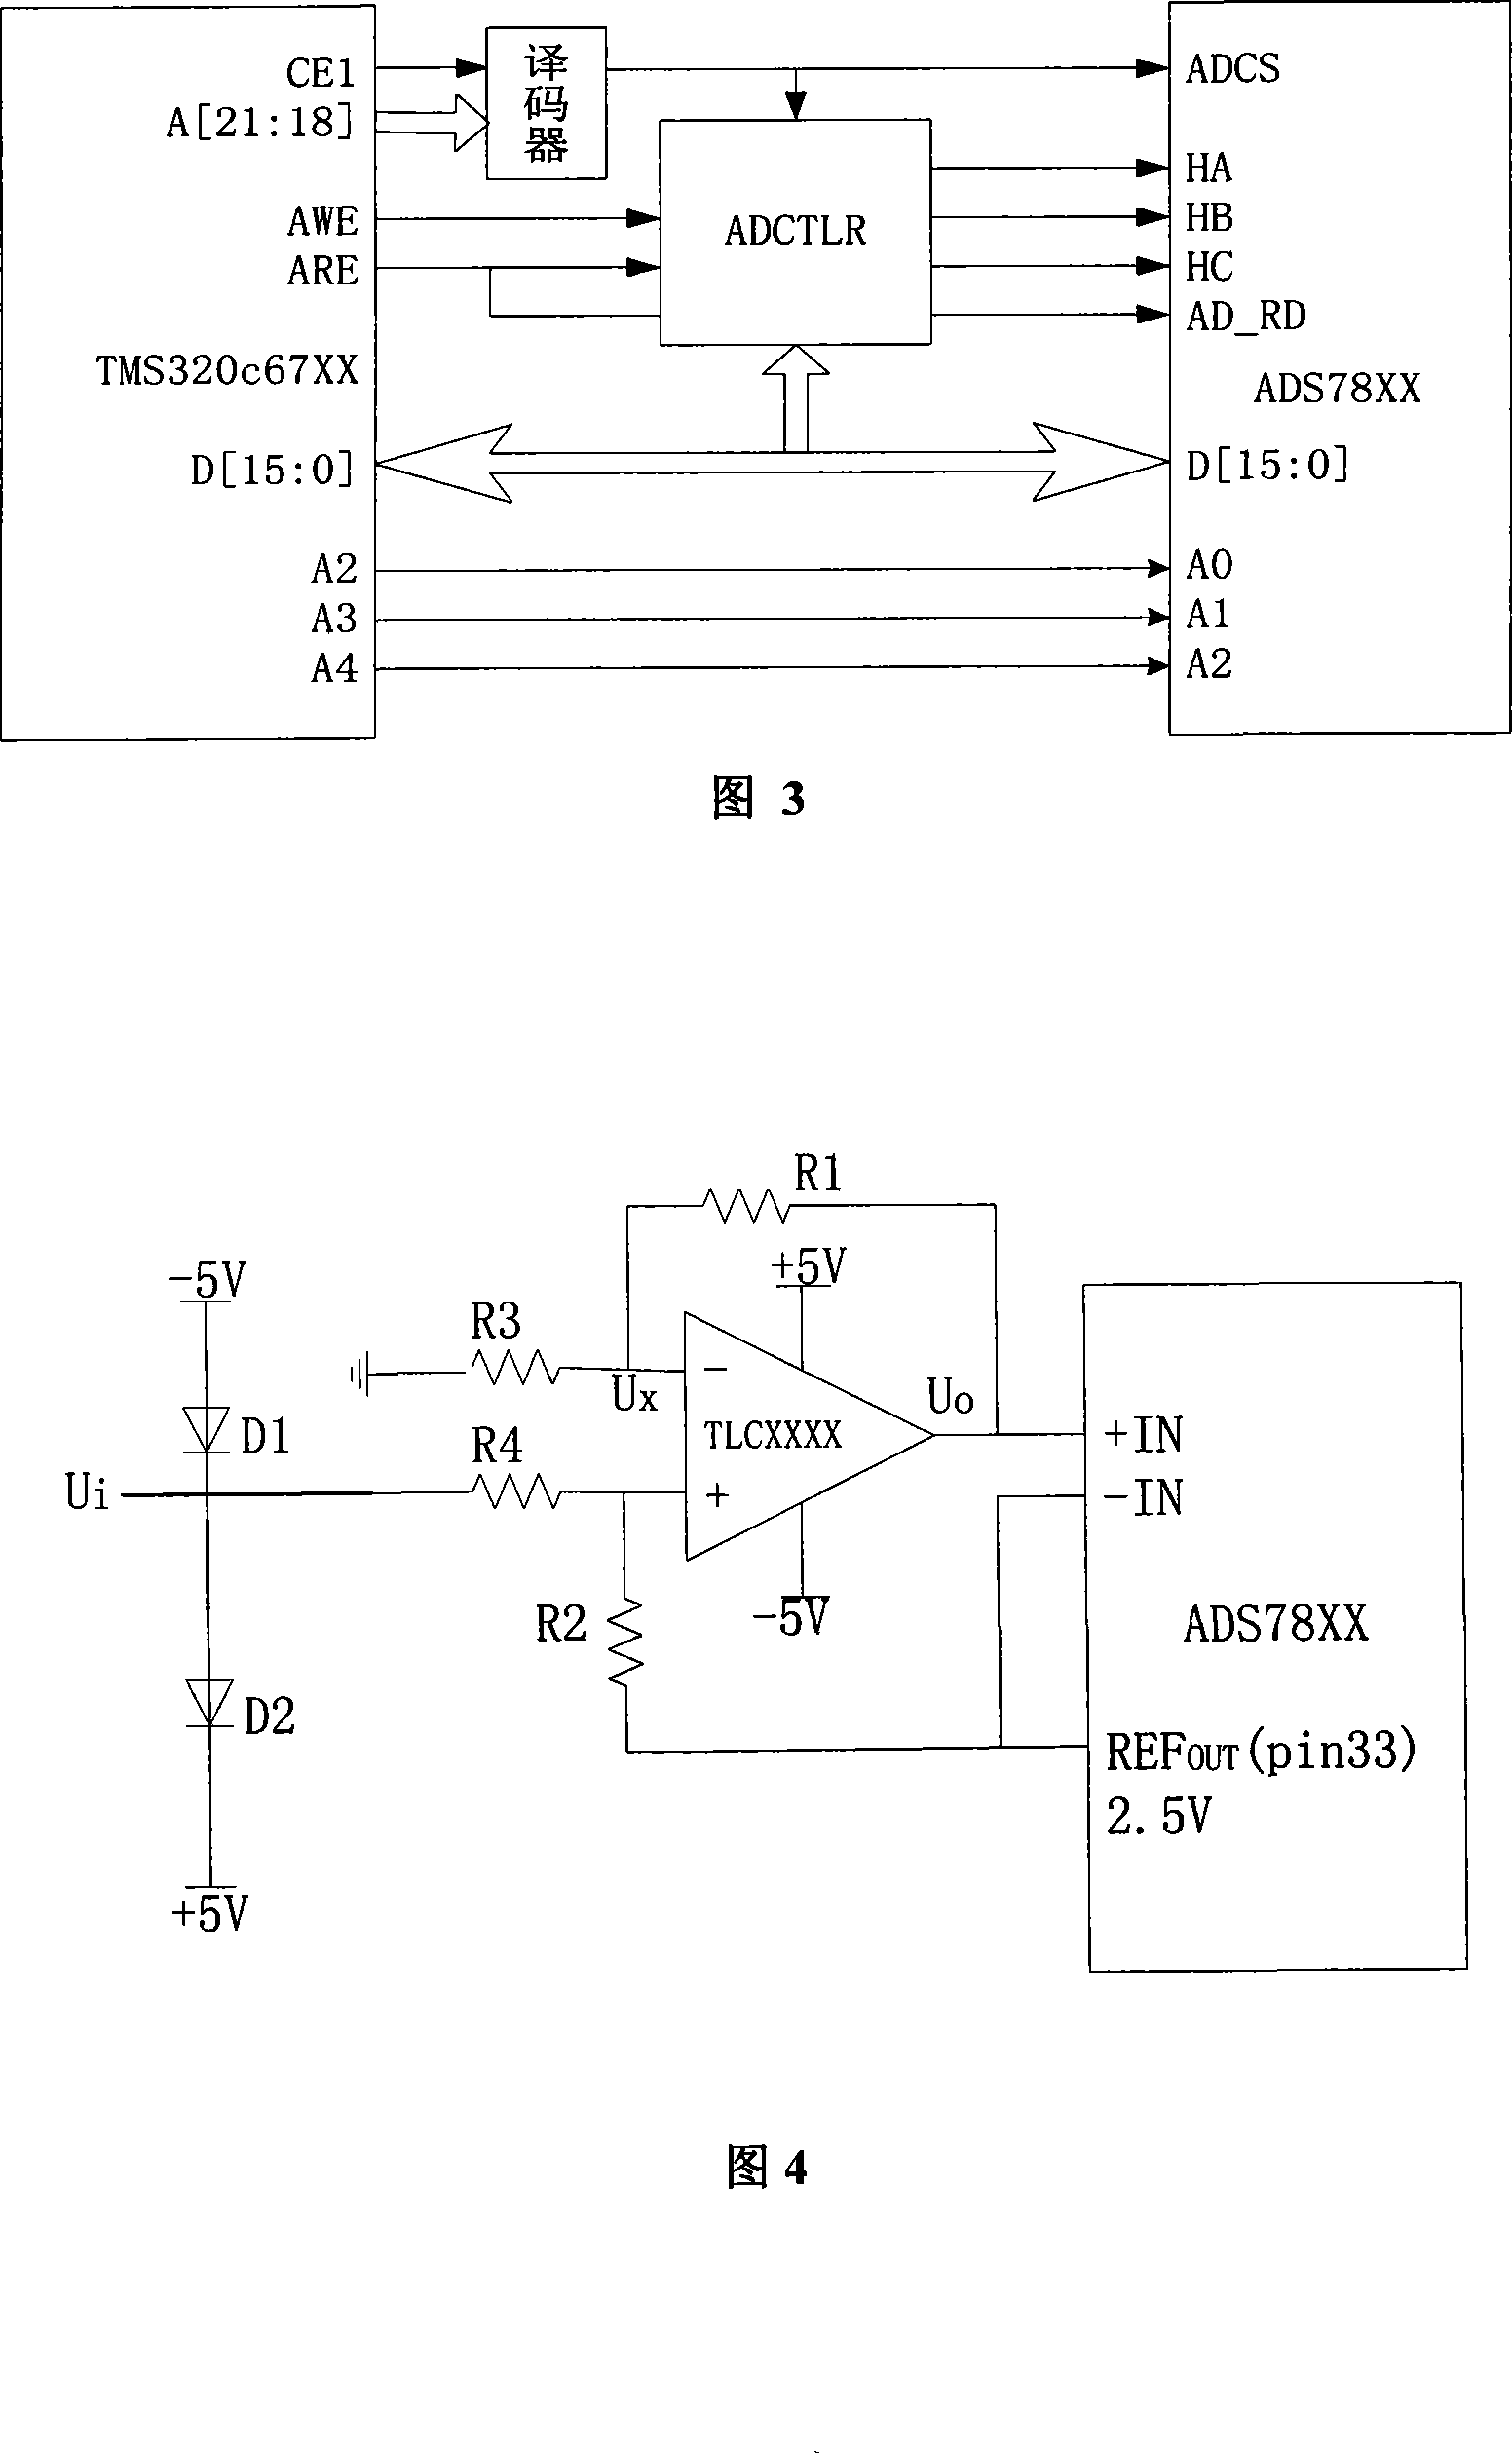 System for data acquisition and signal treatment of testing flat wheel